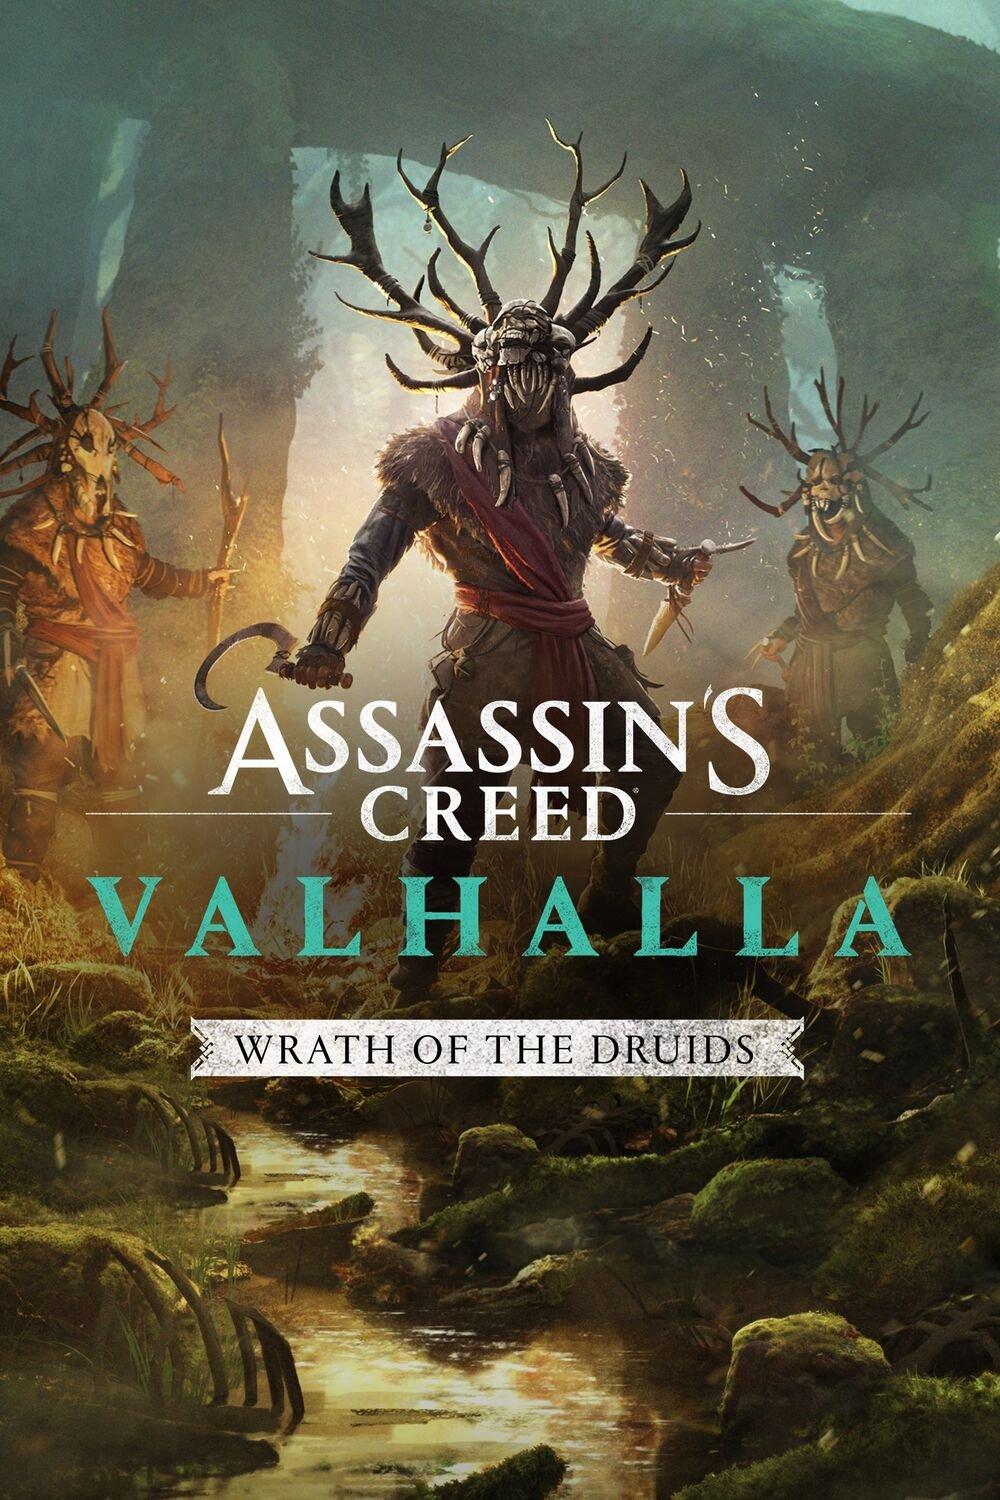 Assassin's Creed Valhalla DLC Wrath of the Druids April Release